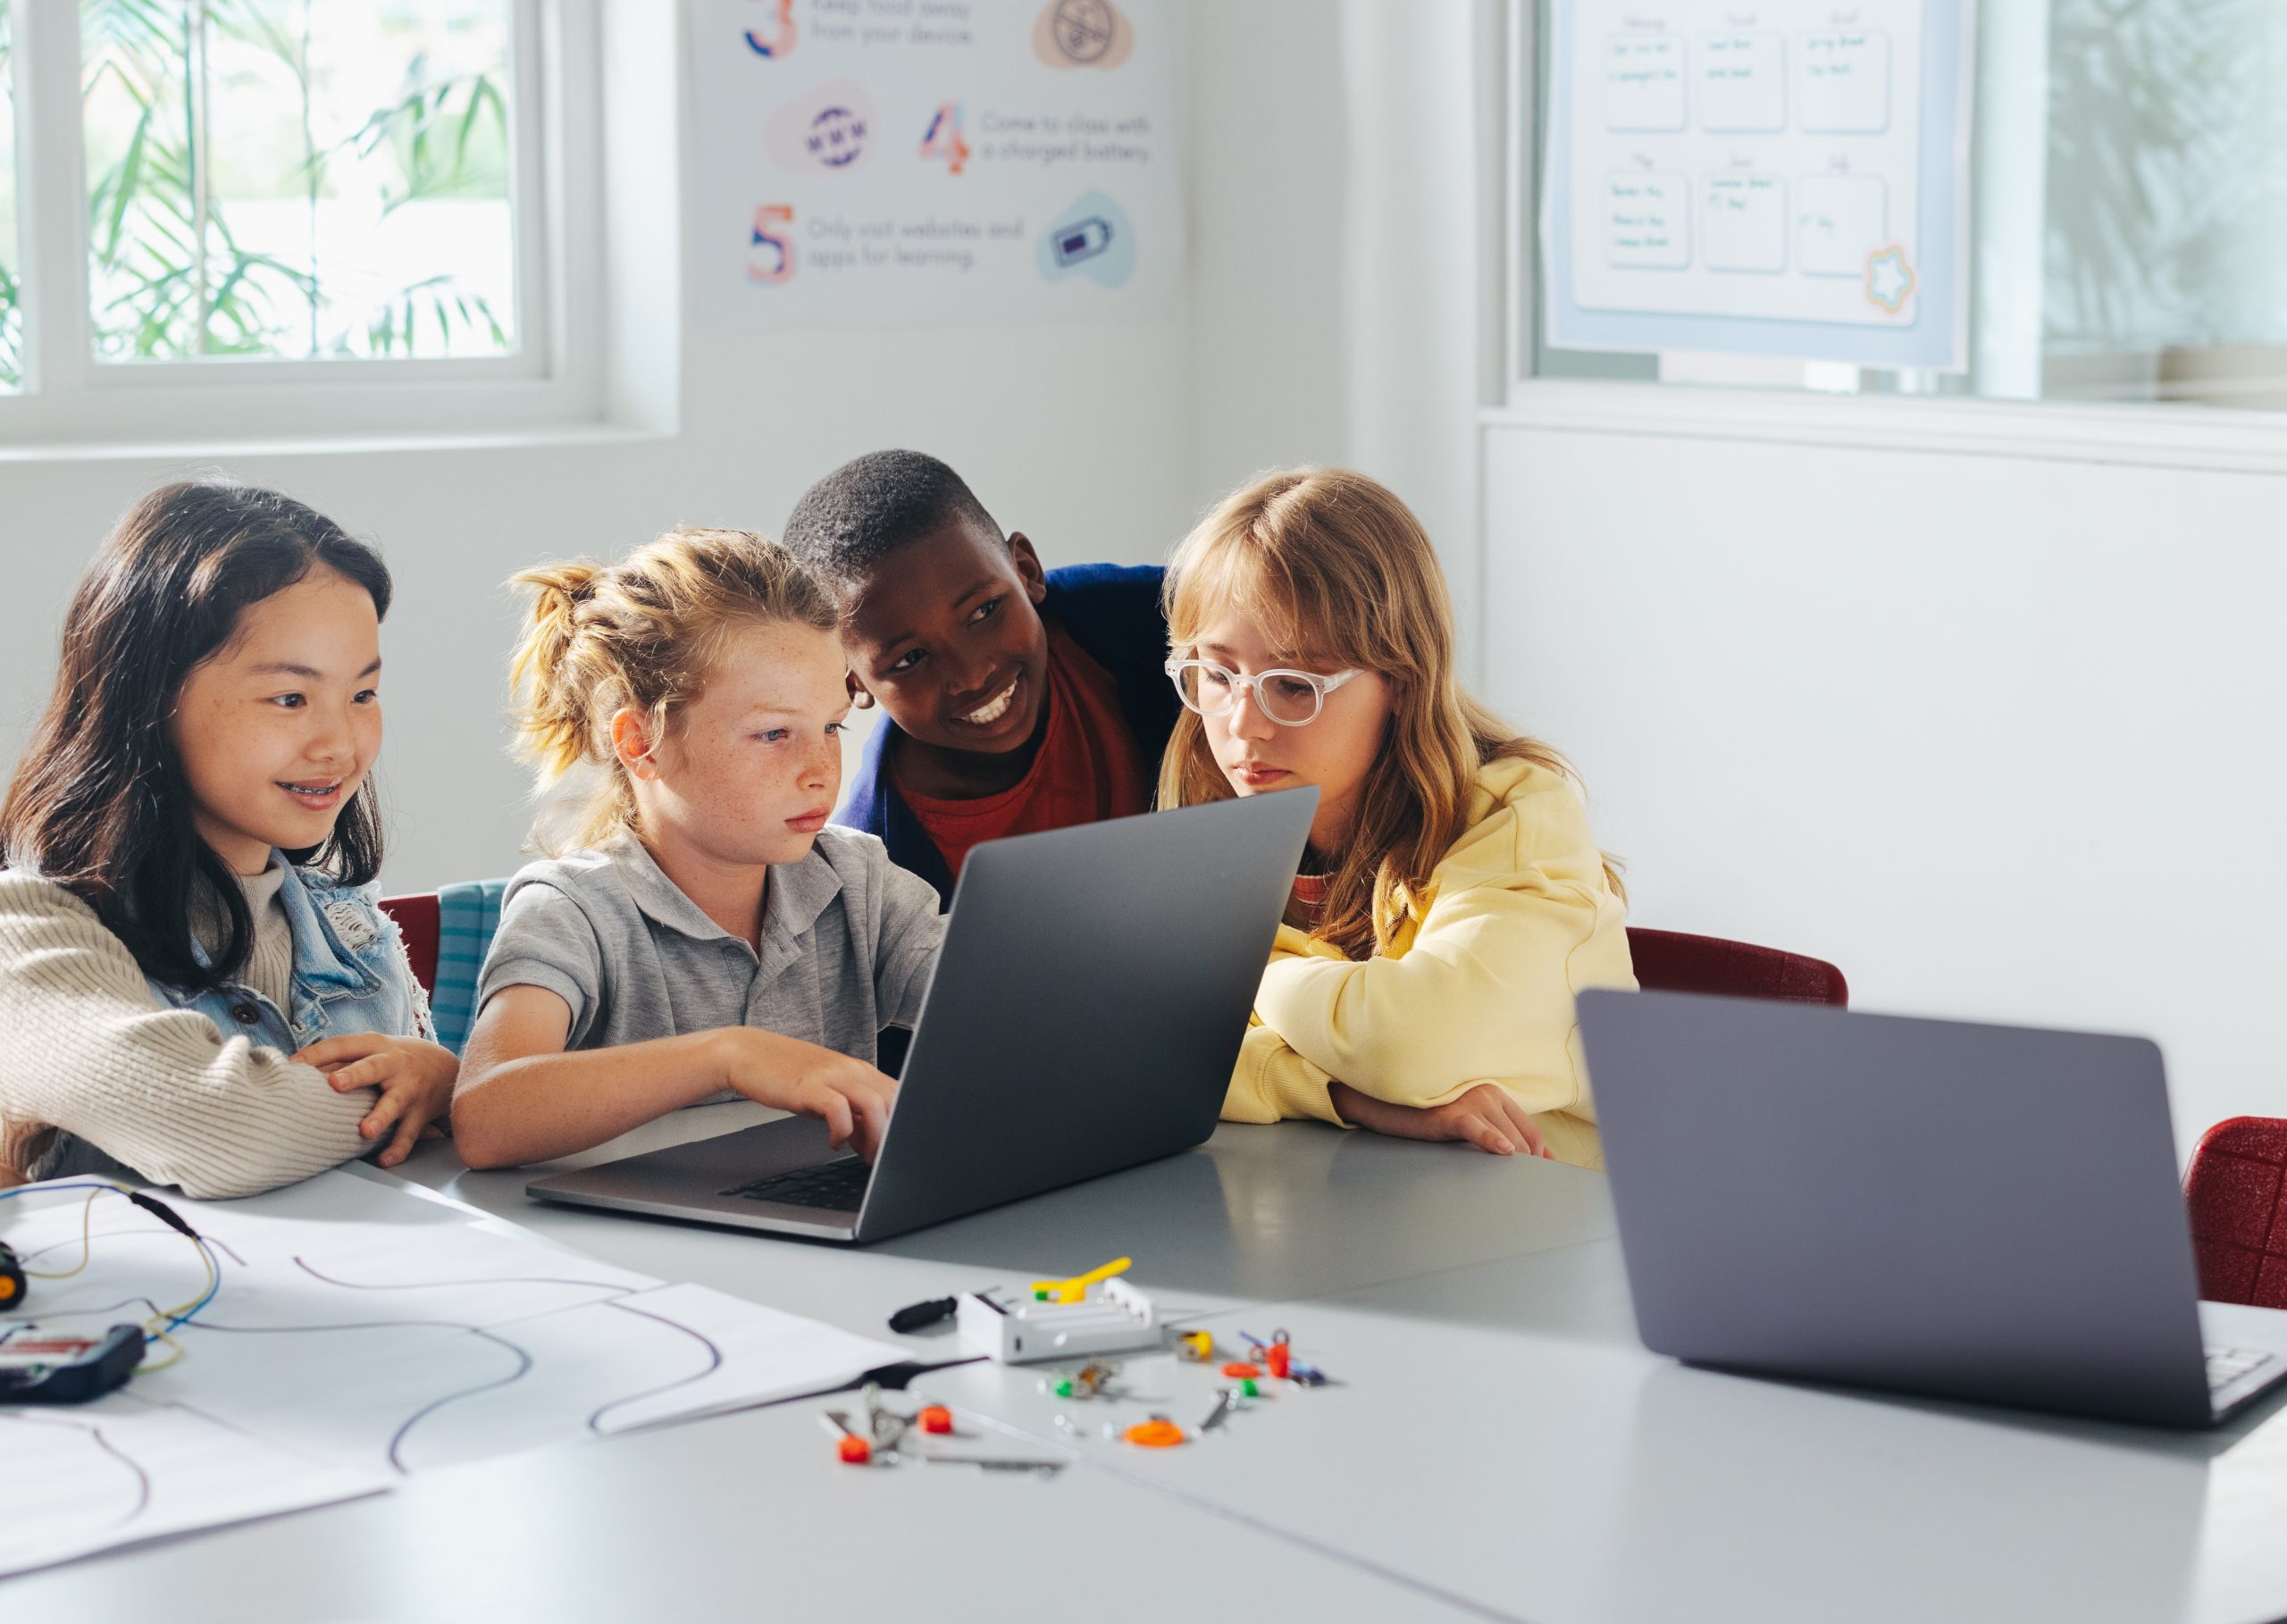 How Can I Engage Students Using Technology?